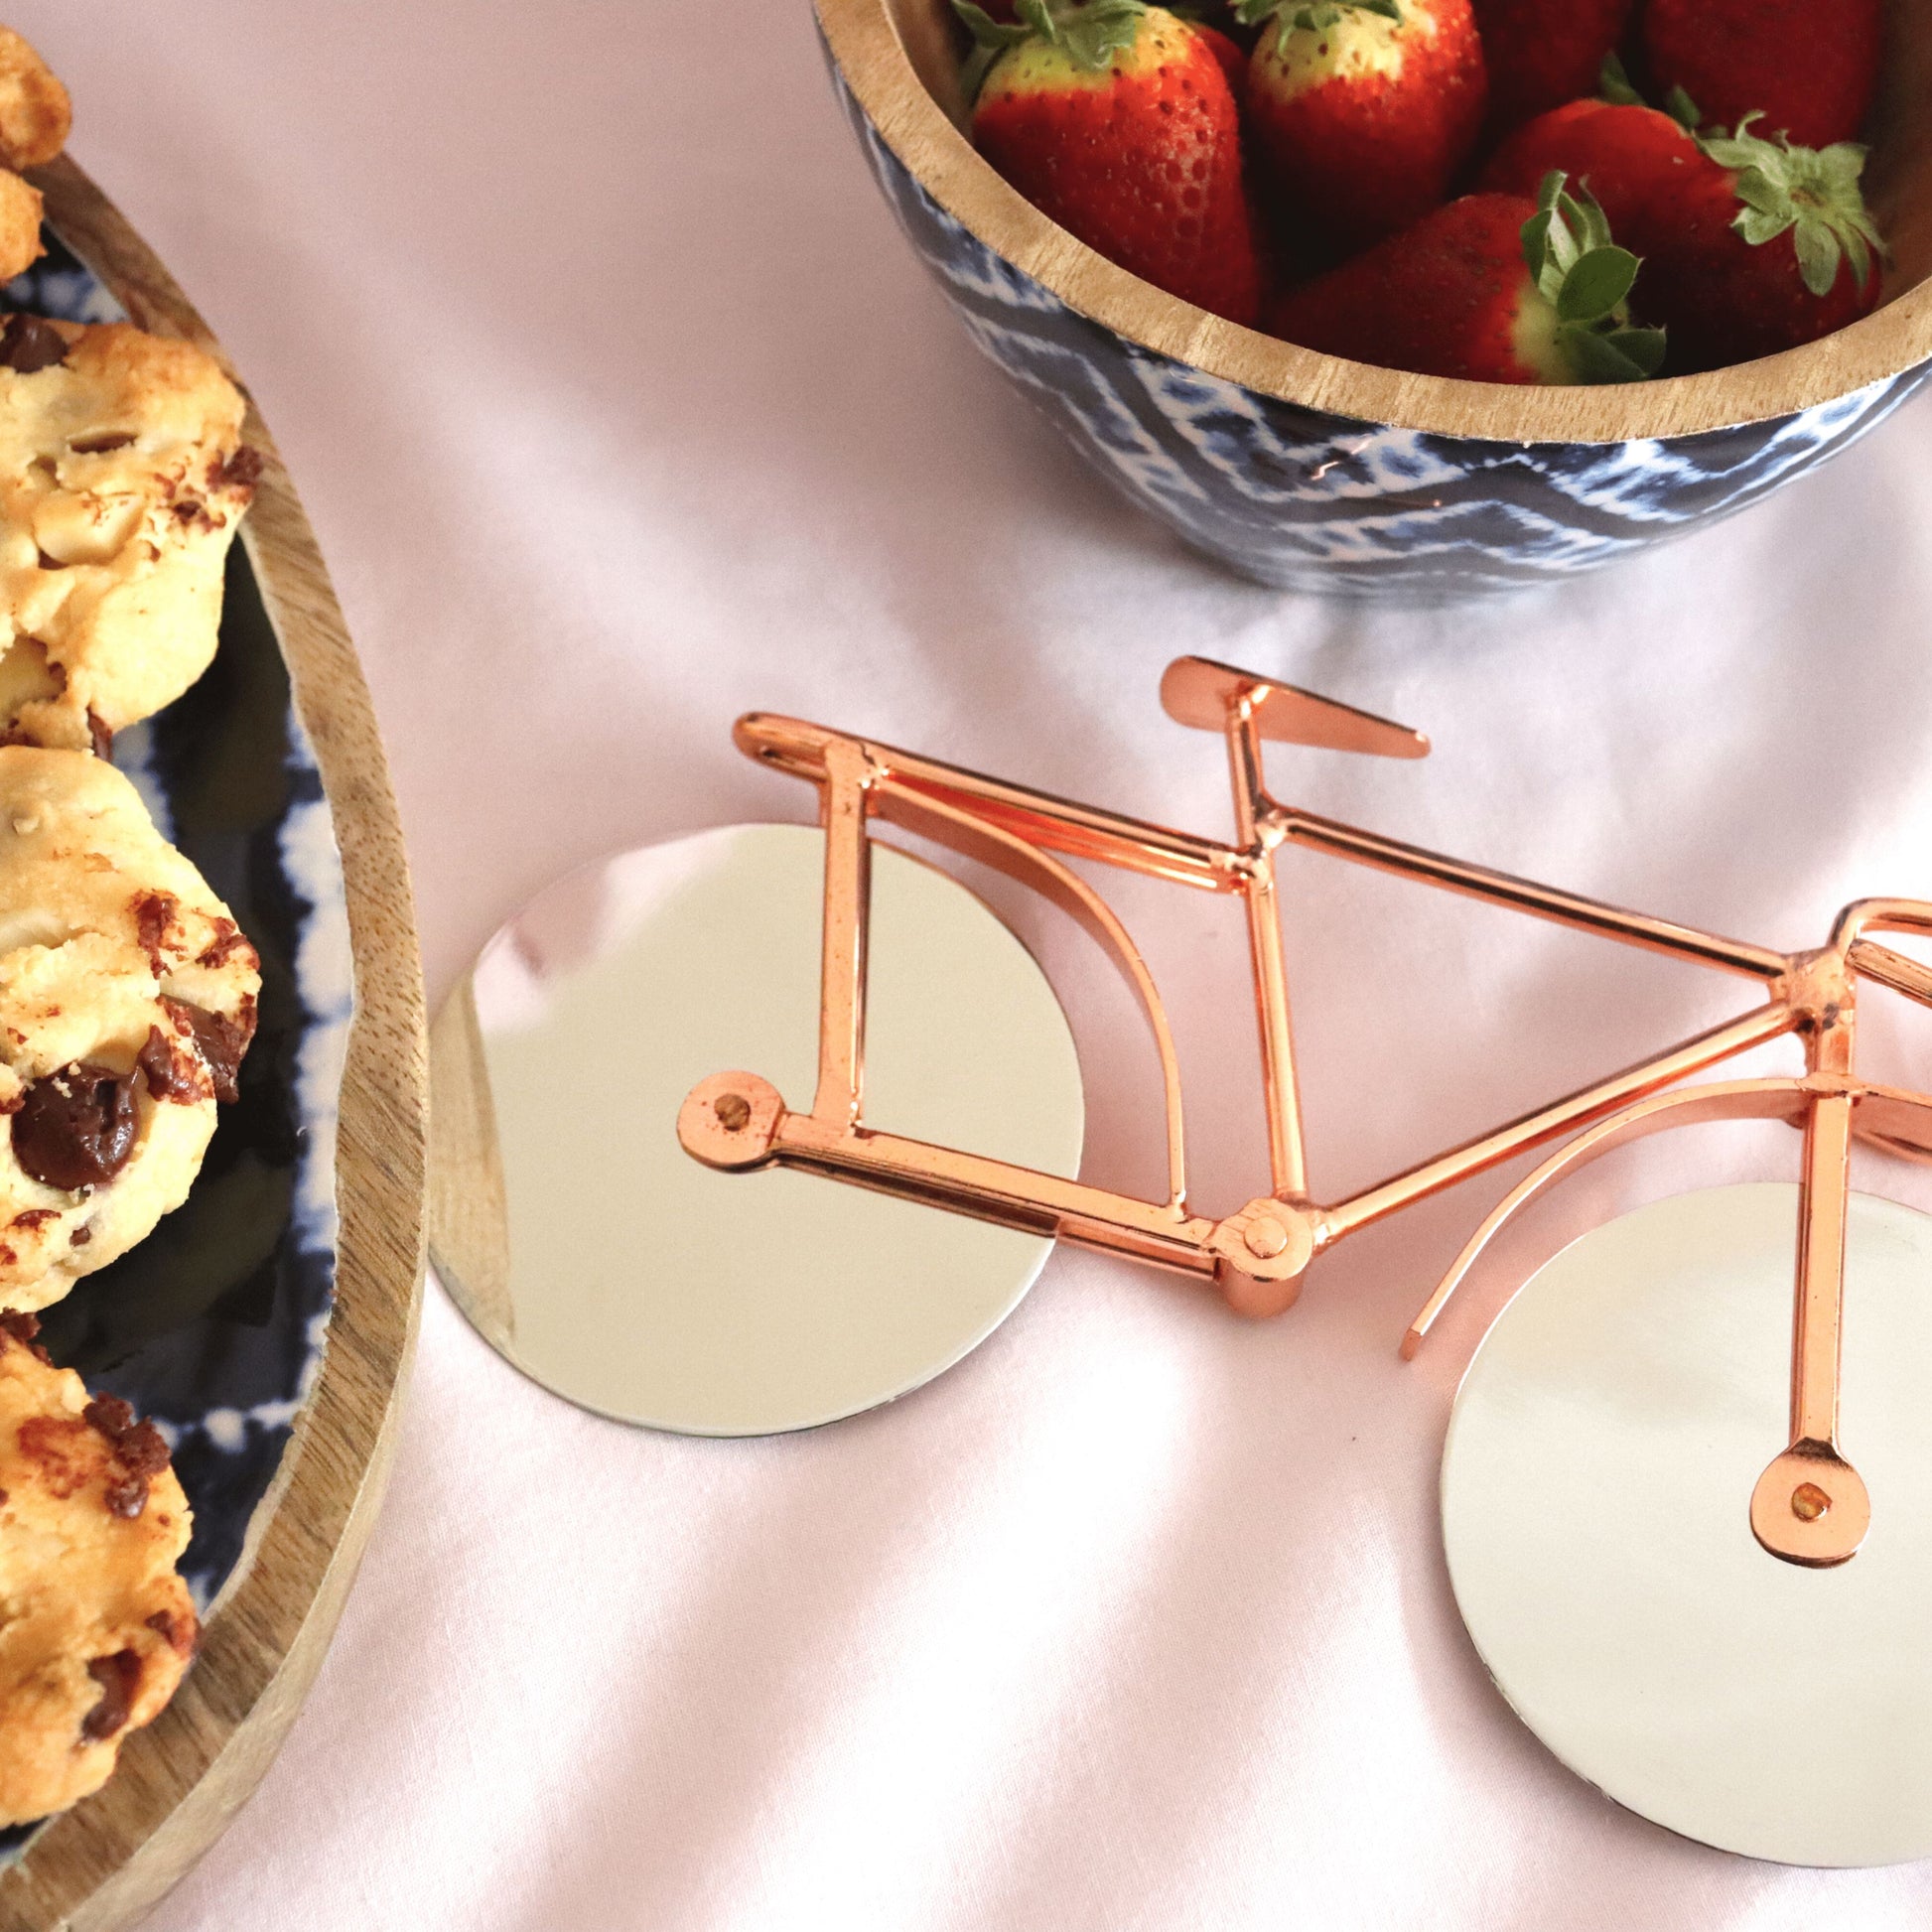 Bicycle Pizza Cutter - Stainless Steel, Rose Gold, Handmade, Novelty Kitchenware - Aksa Home Decor 